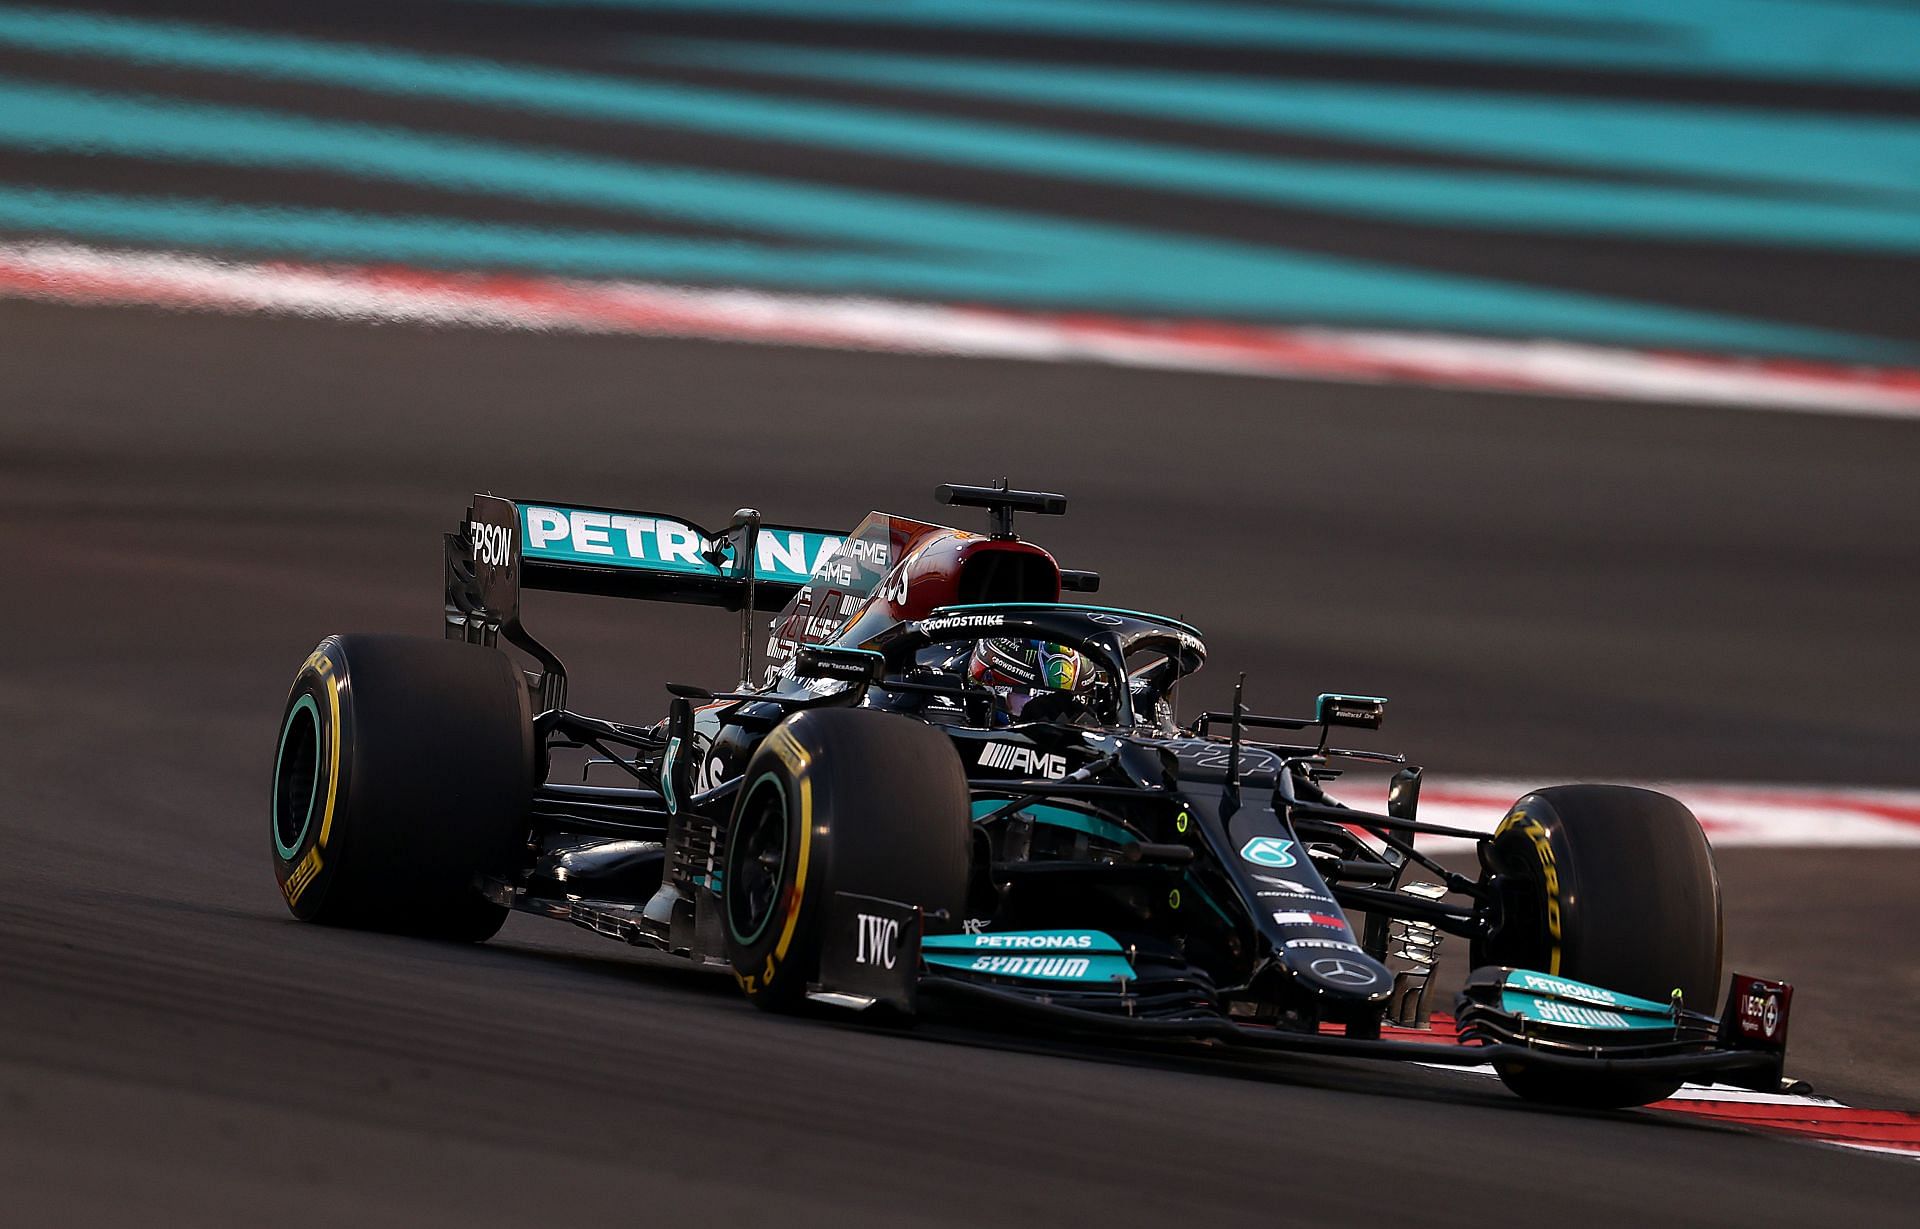 Lewis Hamilton in action at the 2021 Abu Dhabi Grand Prix (Photo by Clive Rose/Getty Images)